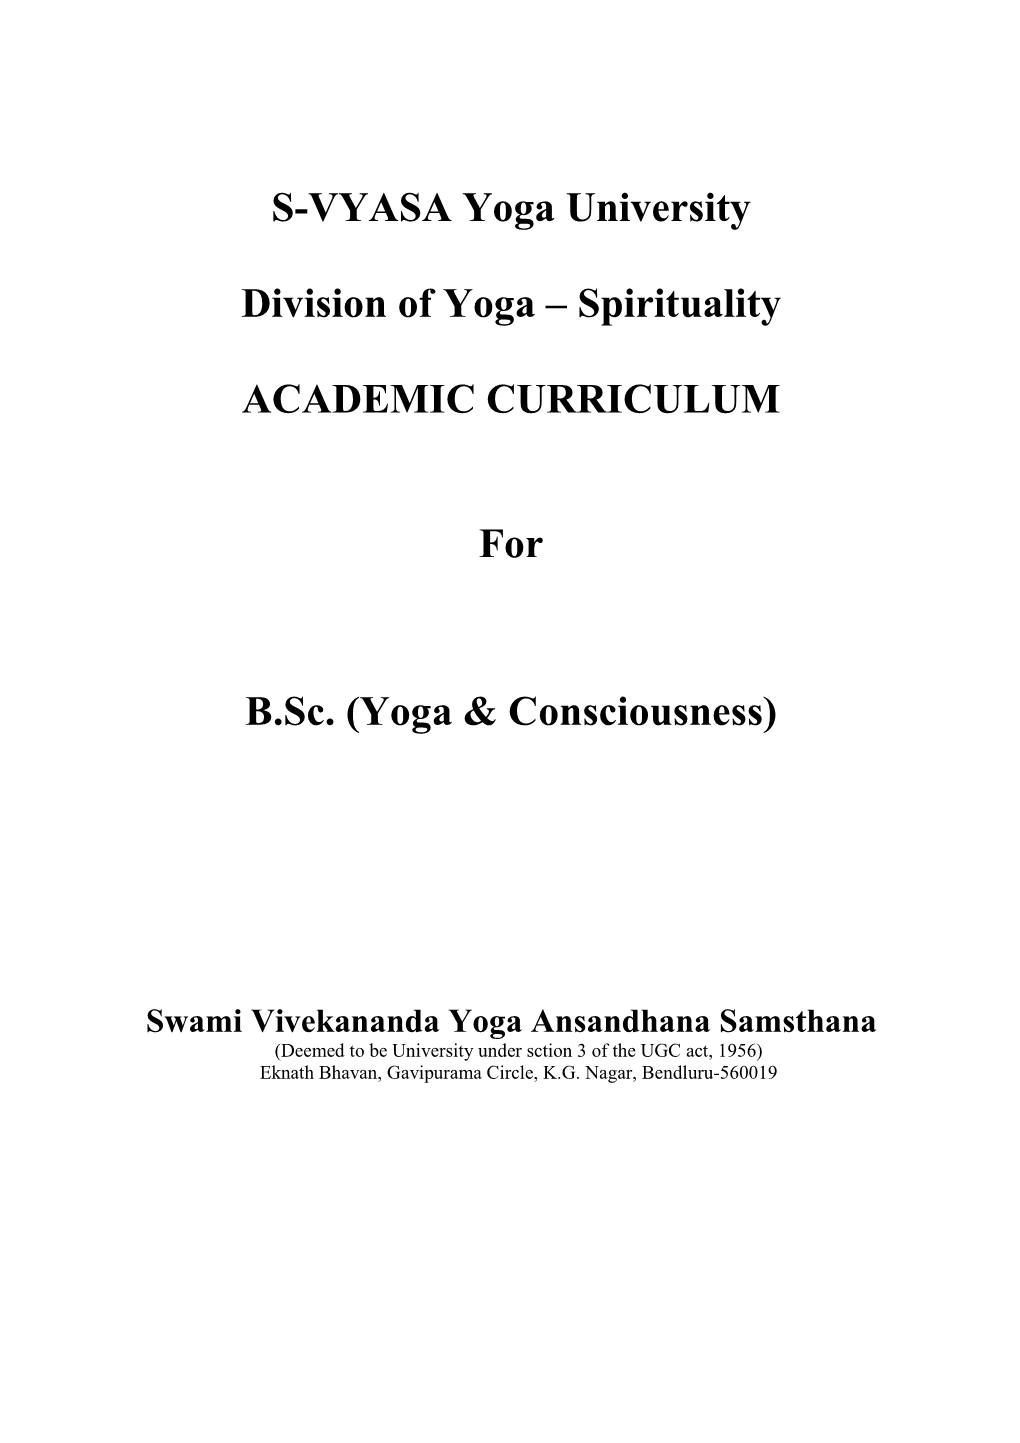 Bsc Yoga and Consciousness 2017